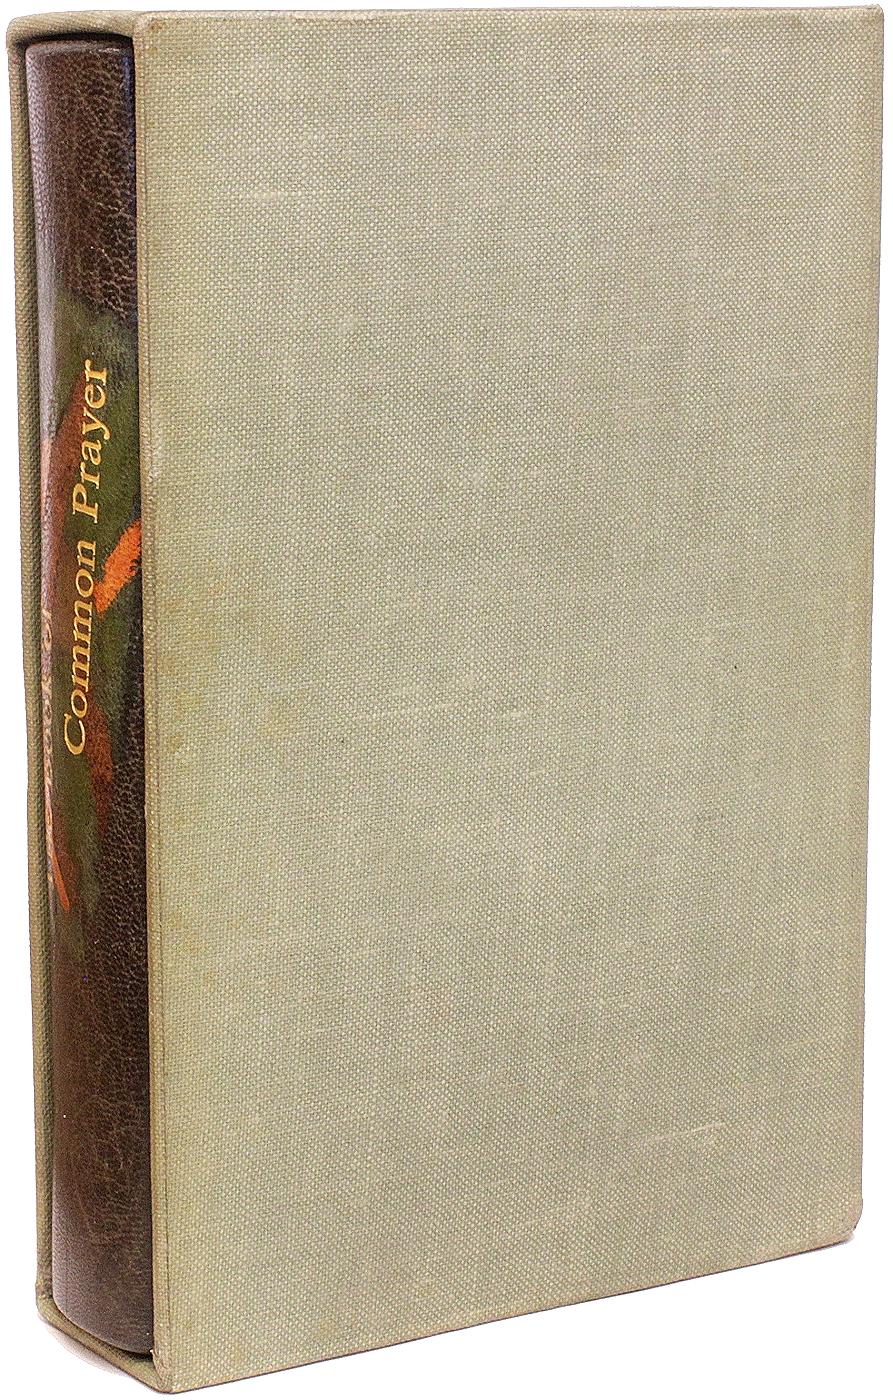 Leather The Book Of Common Prayer - 1960 - IN A SCARCE EARLY BINDING BY PHILIP SMITH ! For Sale